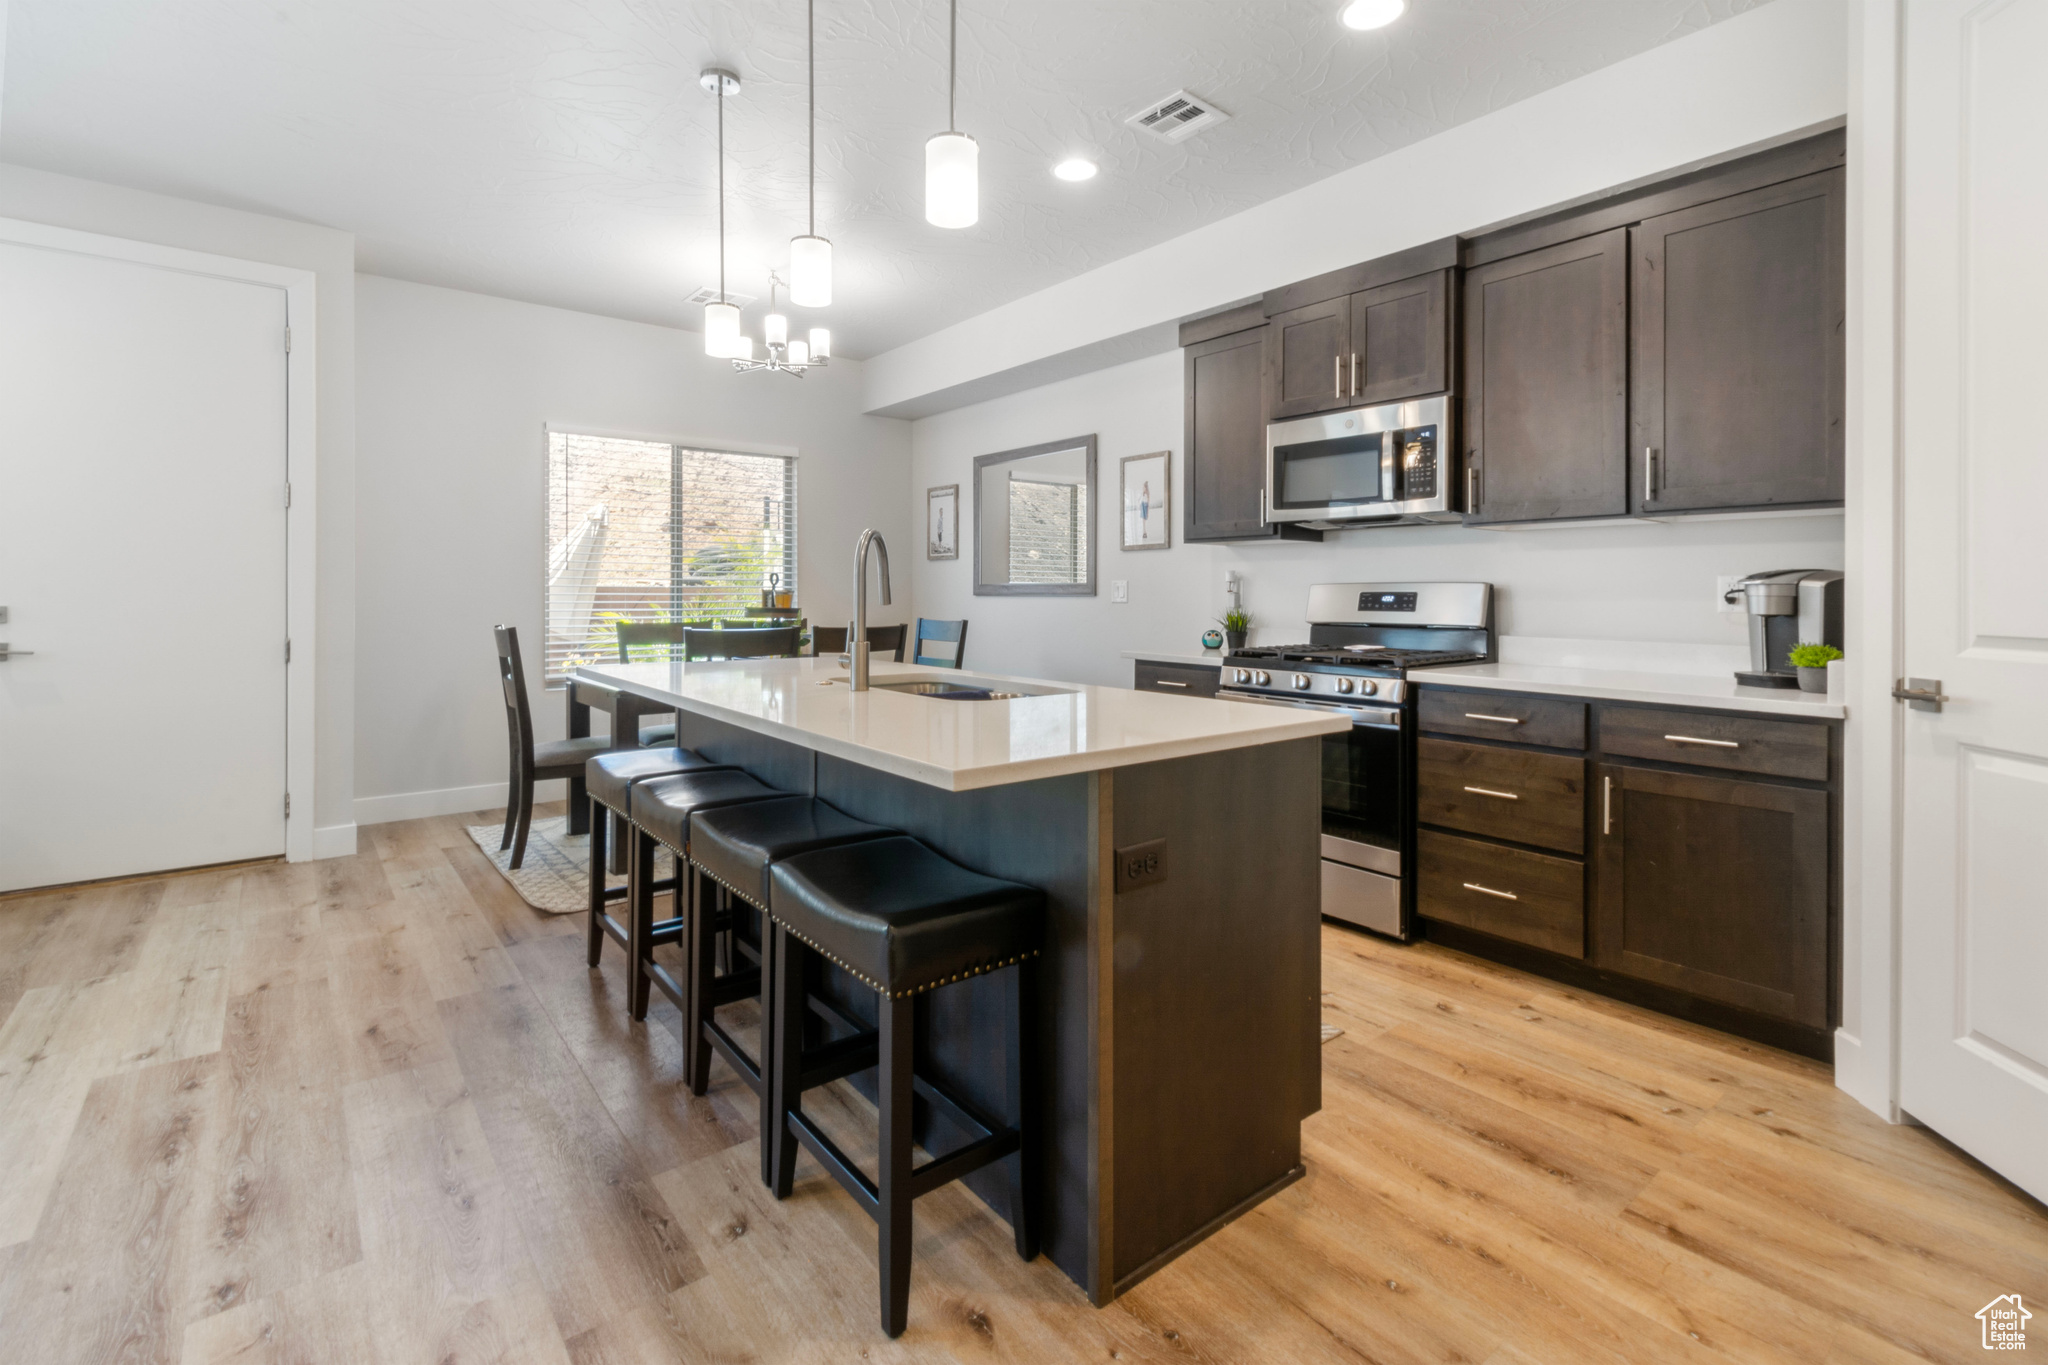 Kitchen featuring light wood-type flooring, hanging light fixtures, sink, a kitchen island with sink, and appliances with stainless steel finishes